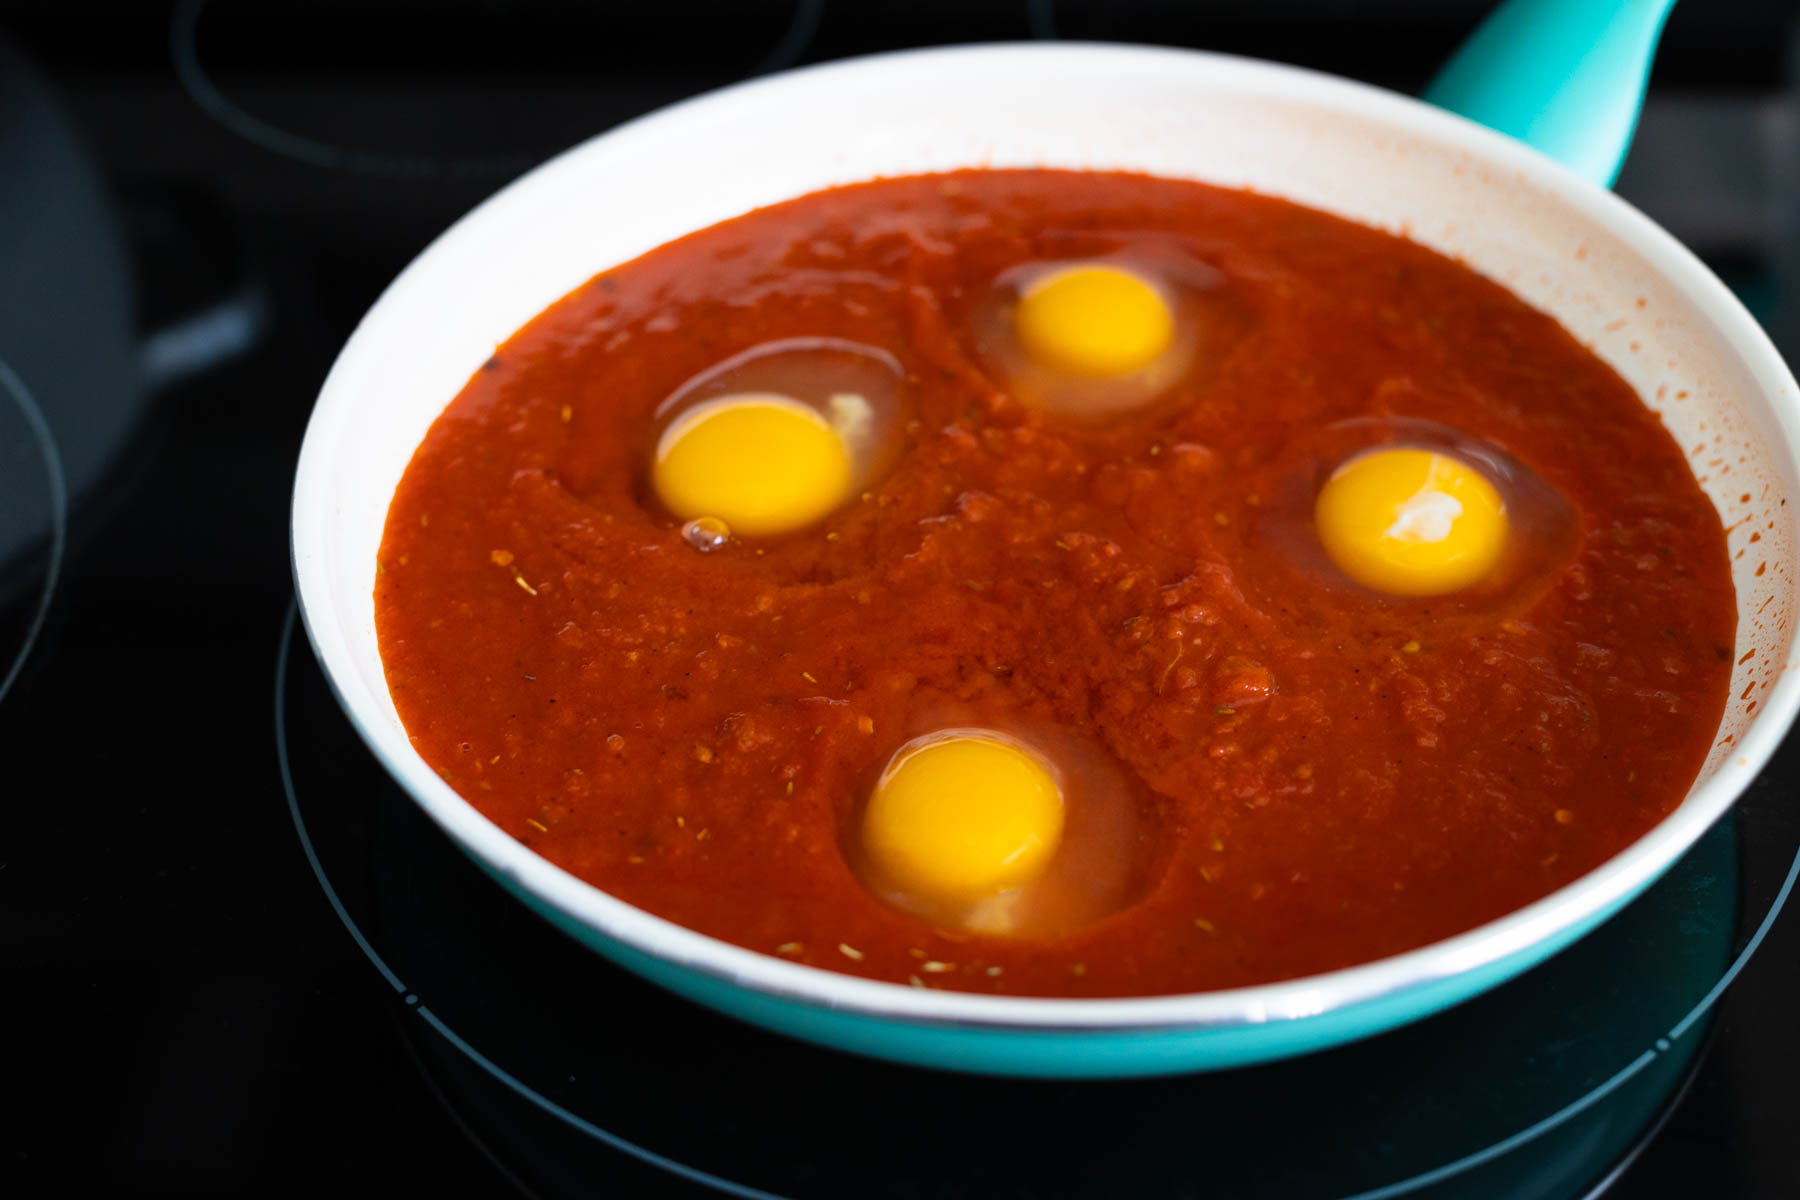 the four eggs have been added to the tomato sauce in the skillet.